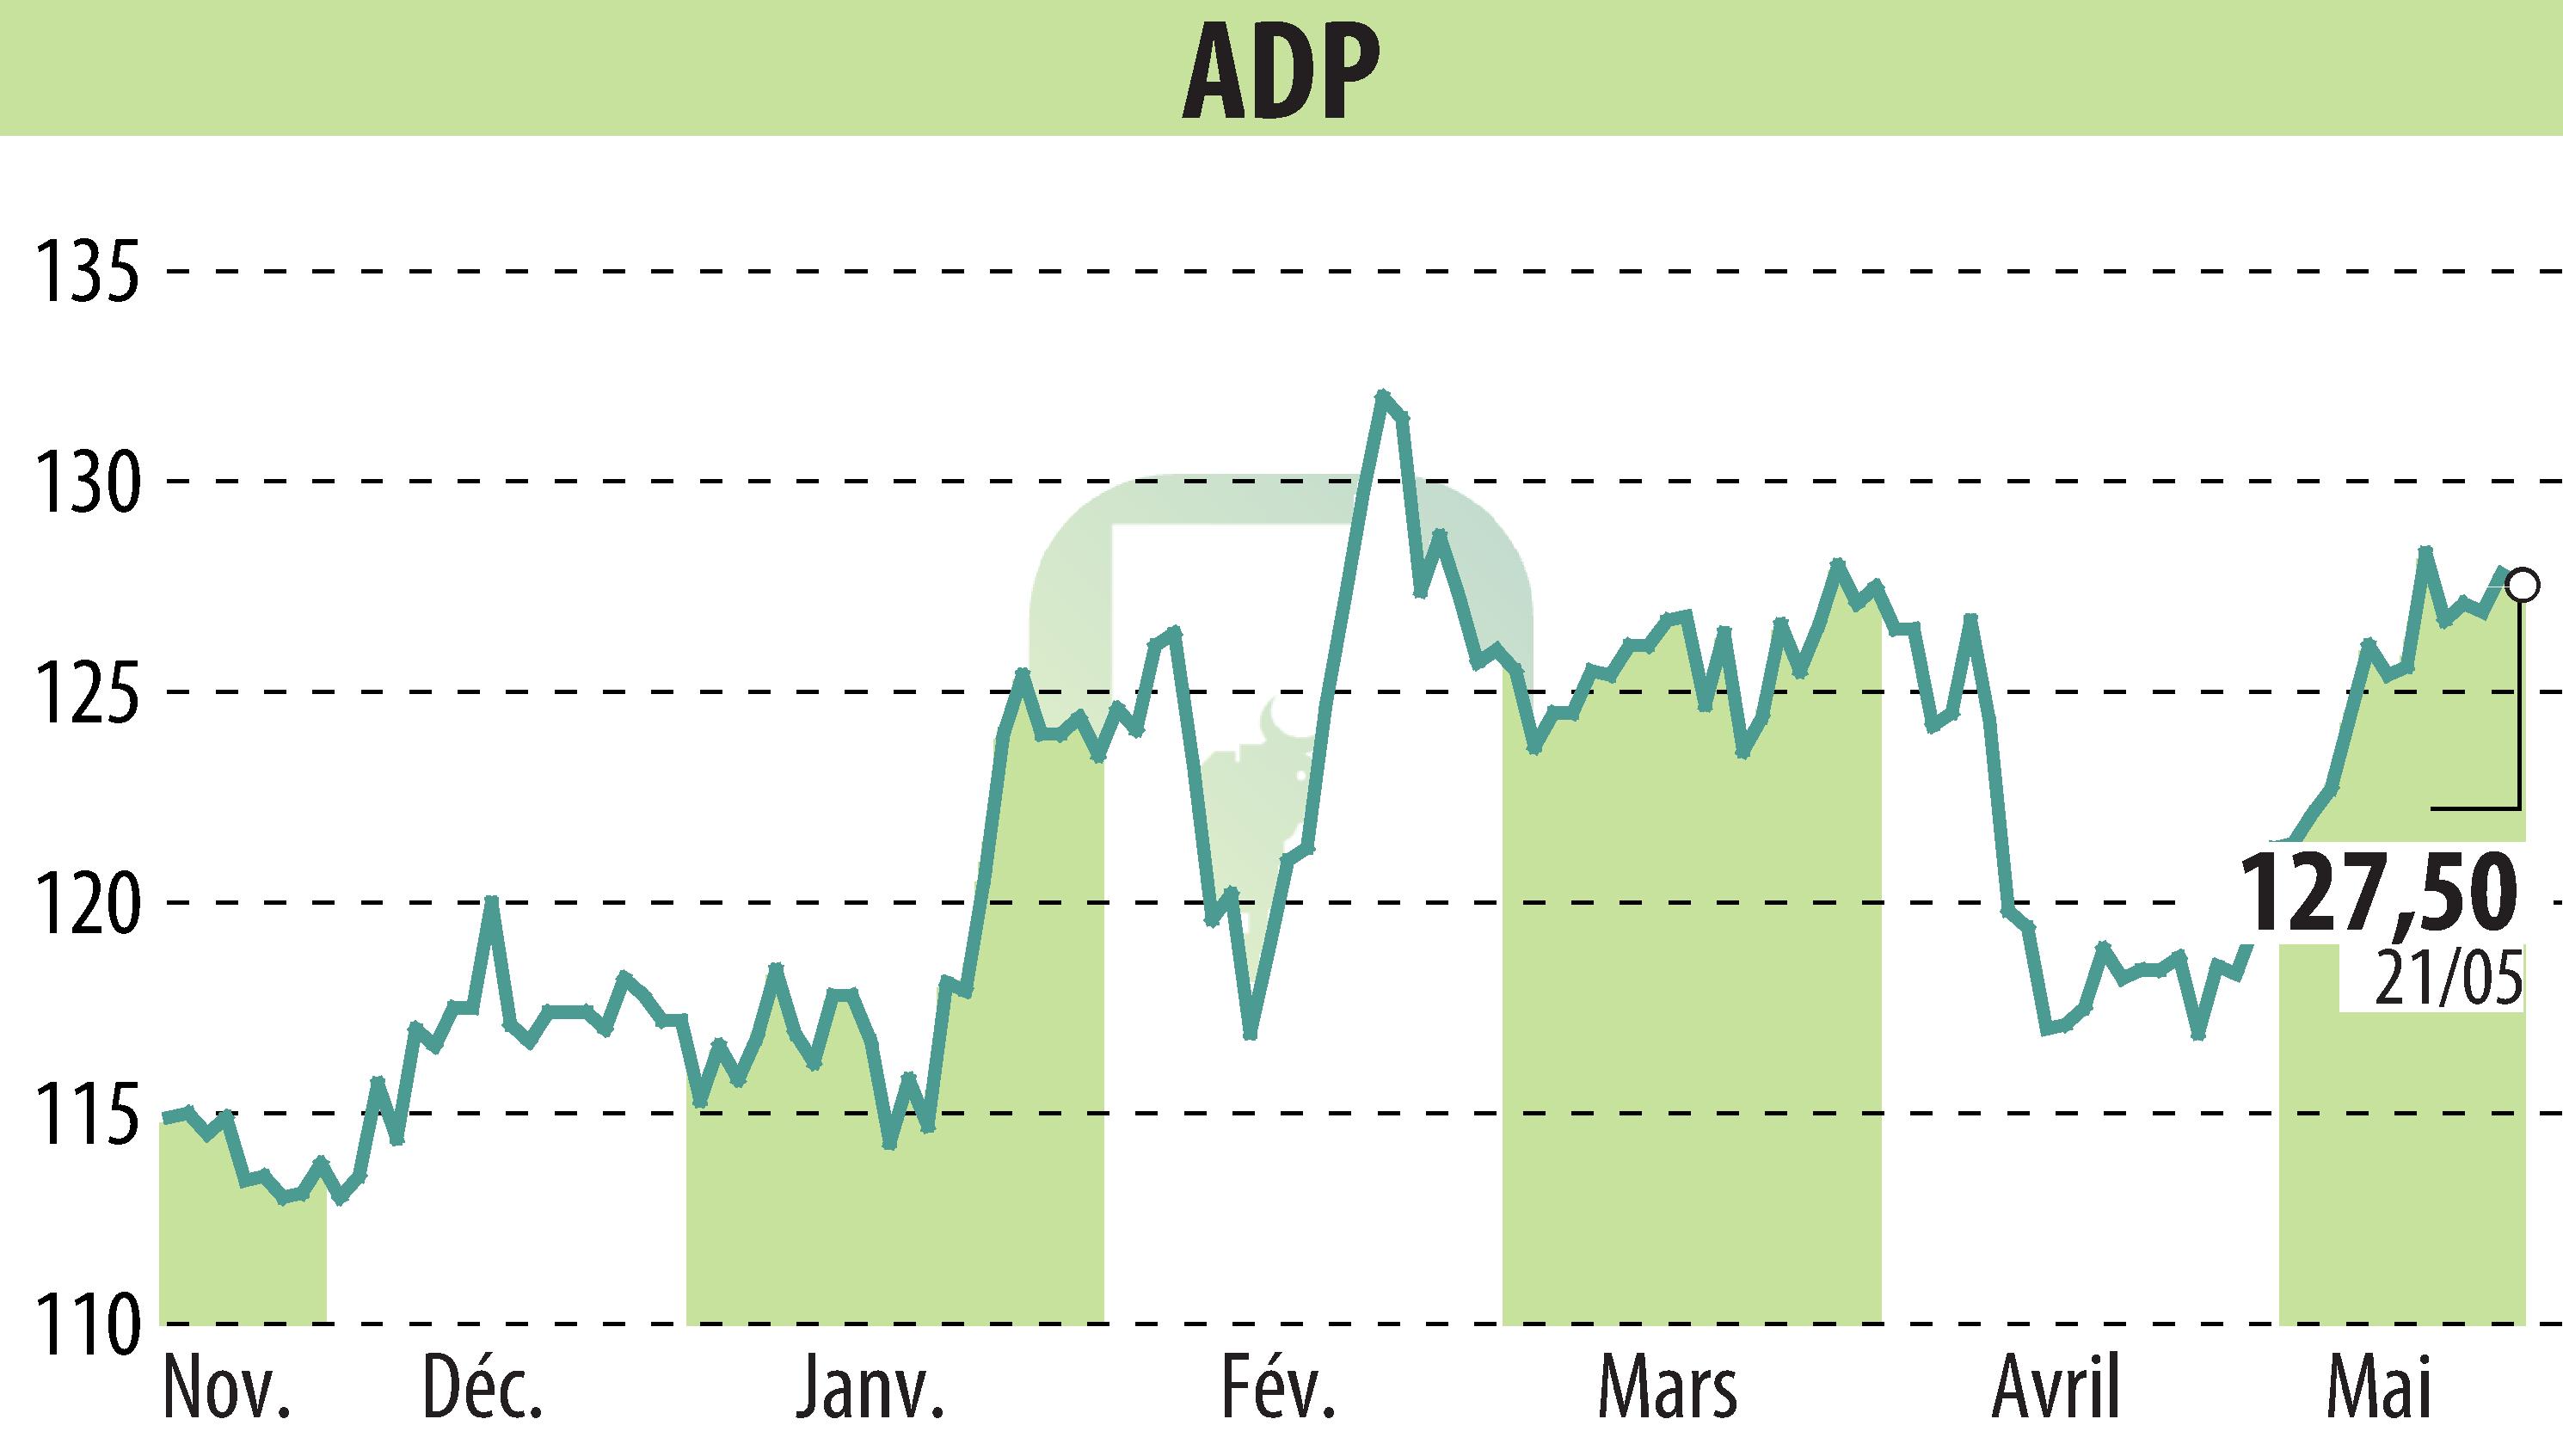 Stock price chart of GROUPE ADP (EPA:ADP) showing fluctuations.